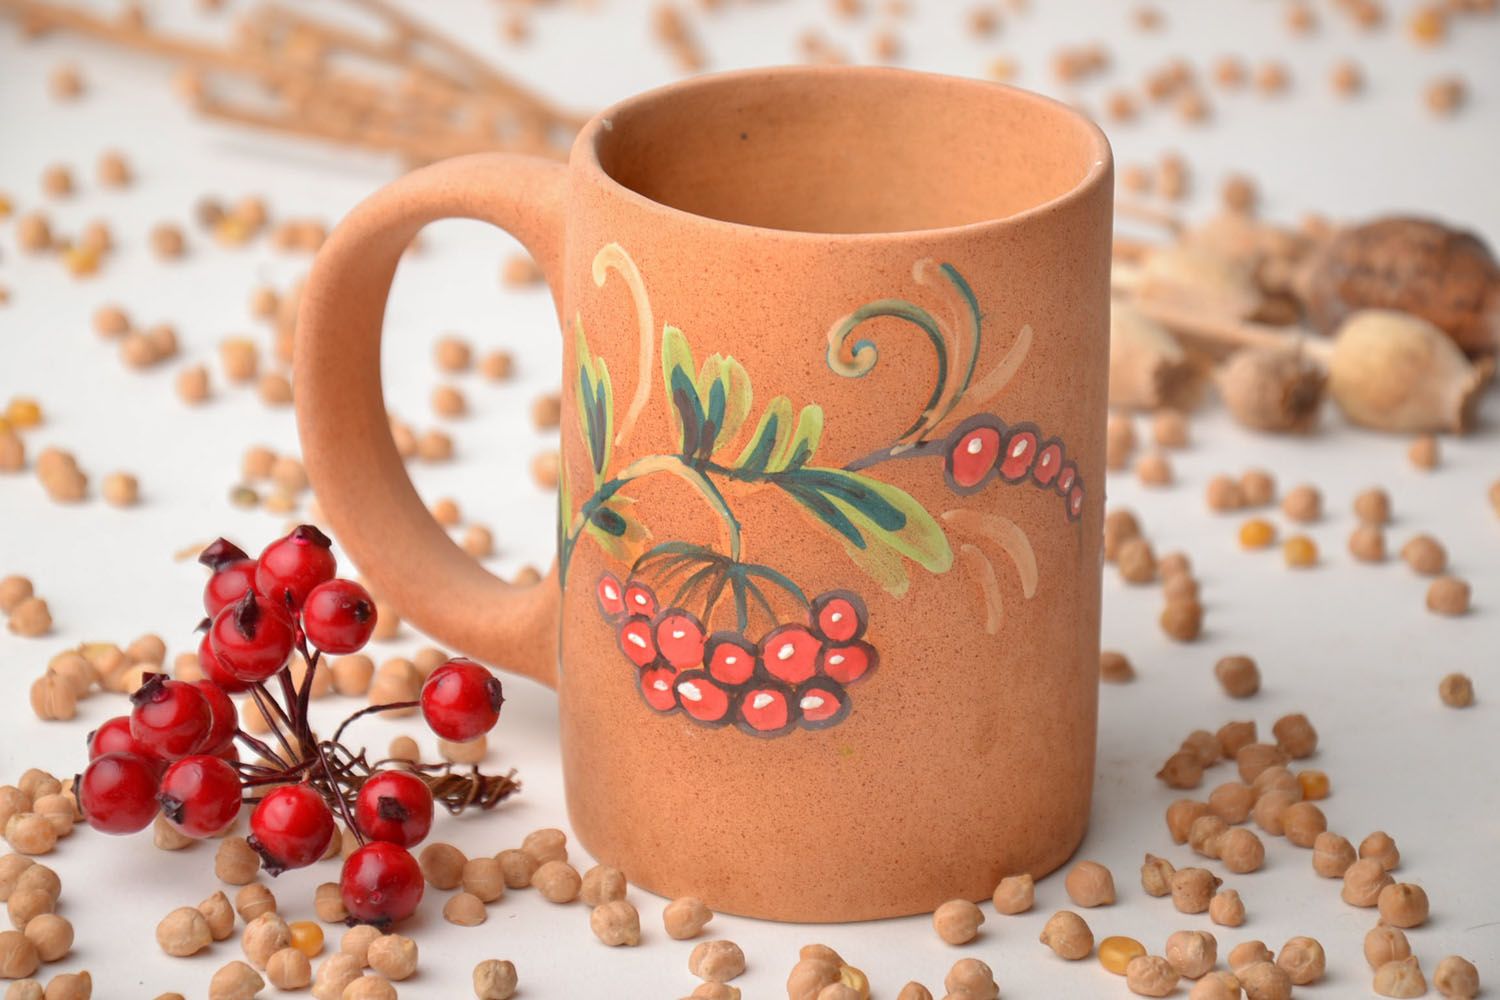 Handmade natural clay glazed coffee mug with handle and hand-painted floral pattern photo 1